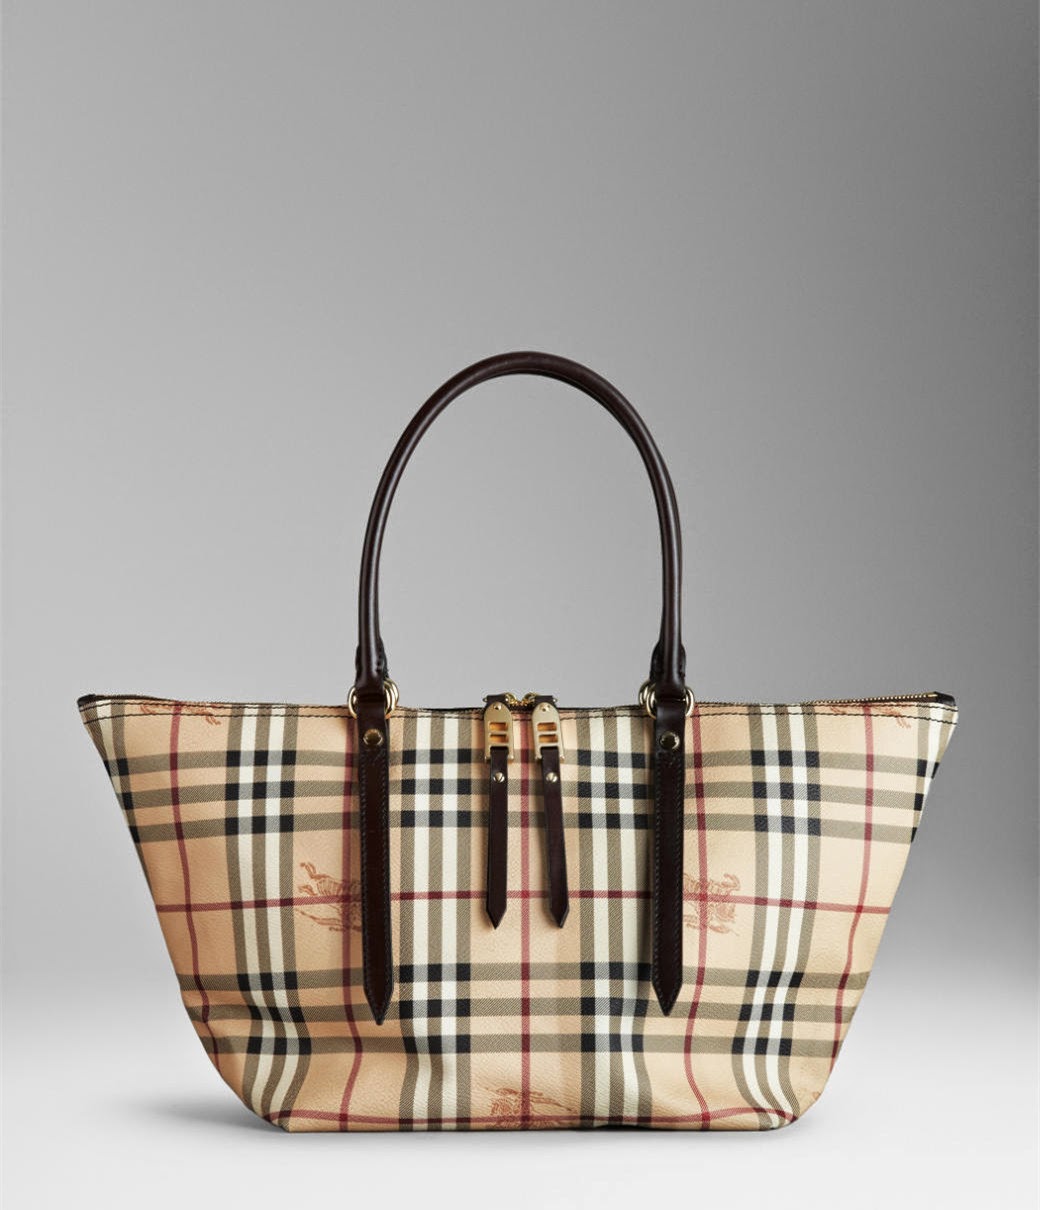 Neo LUXuries: BURBERRY Haymarket Check Tote with Oversized Zippers